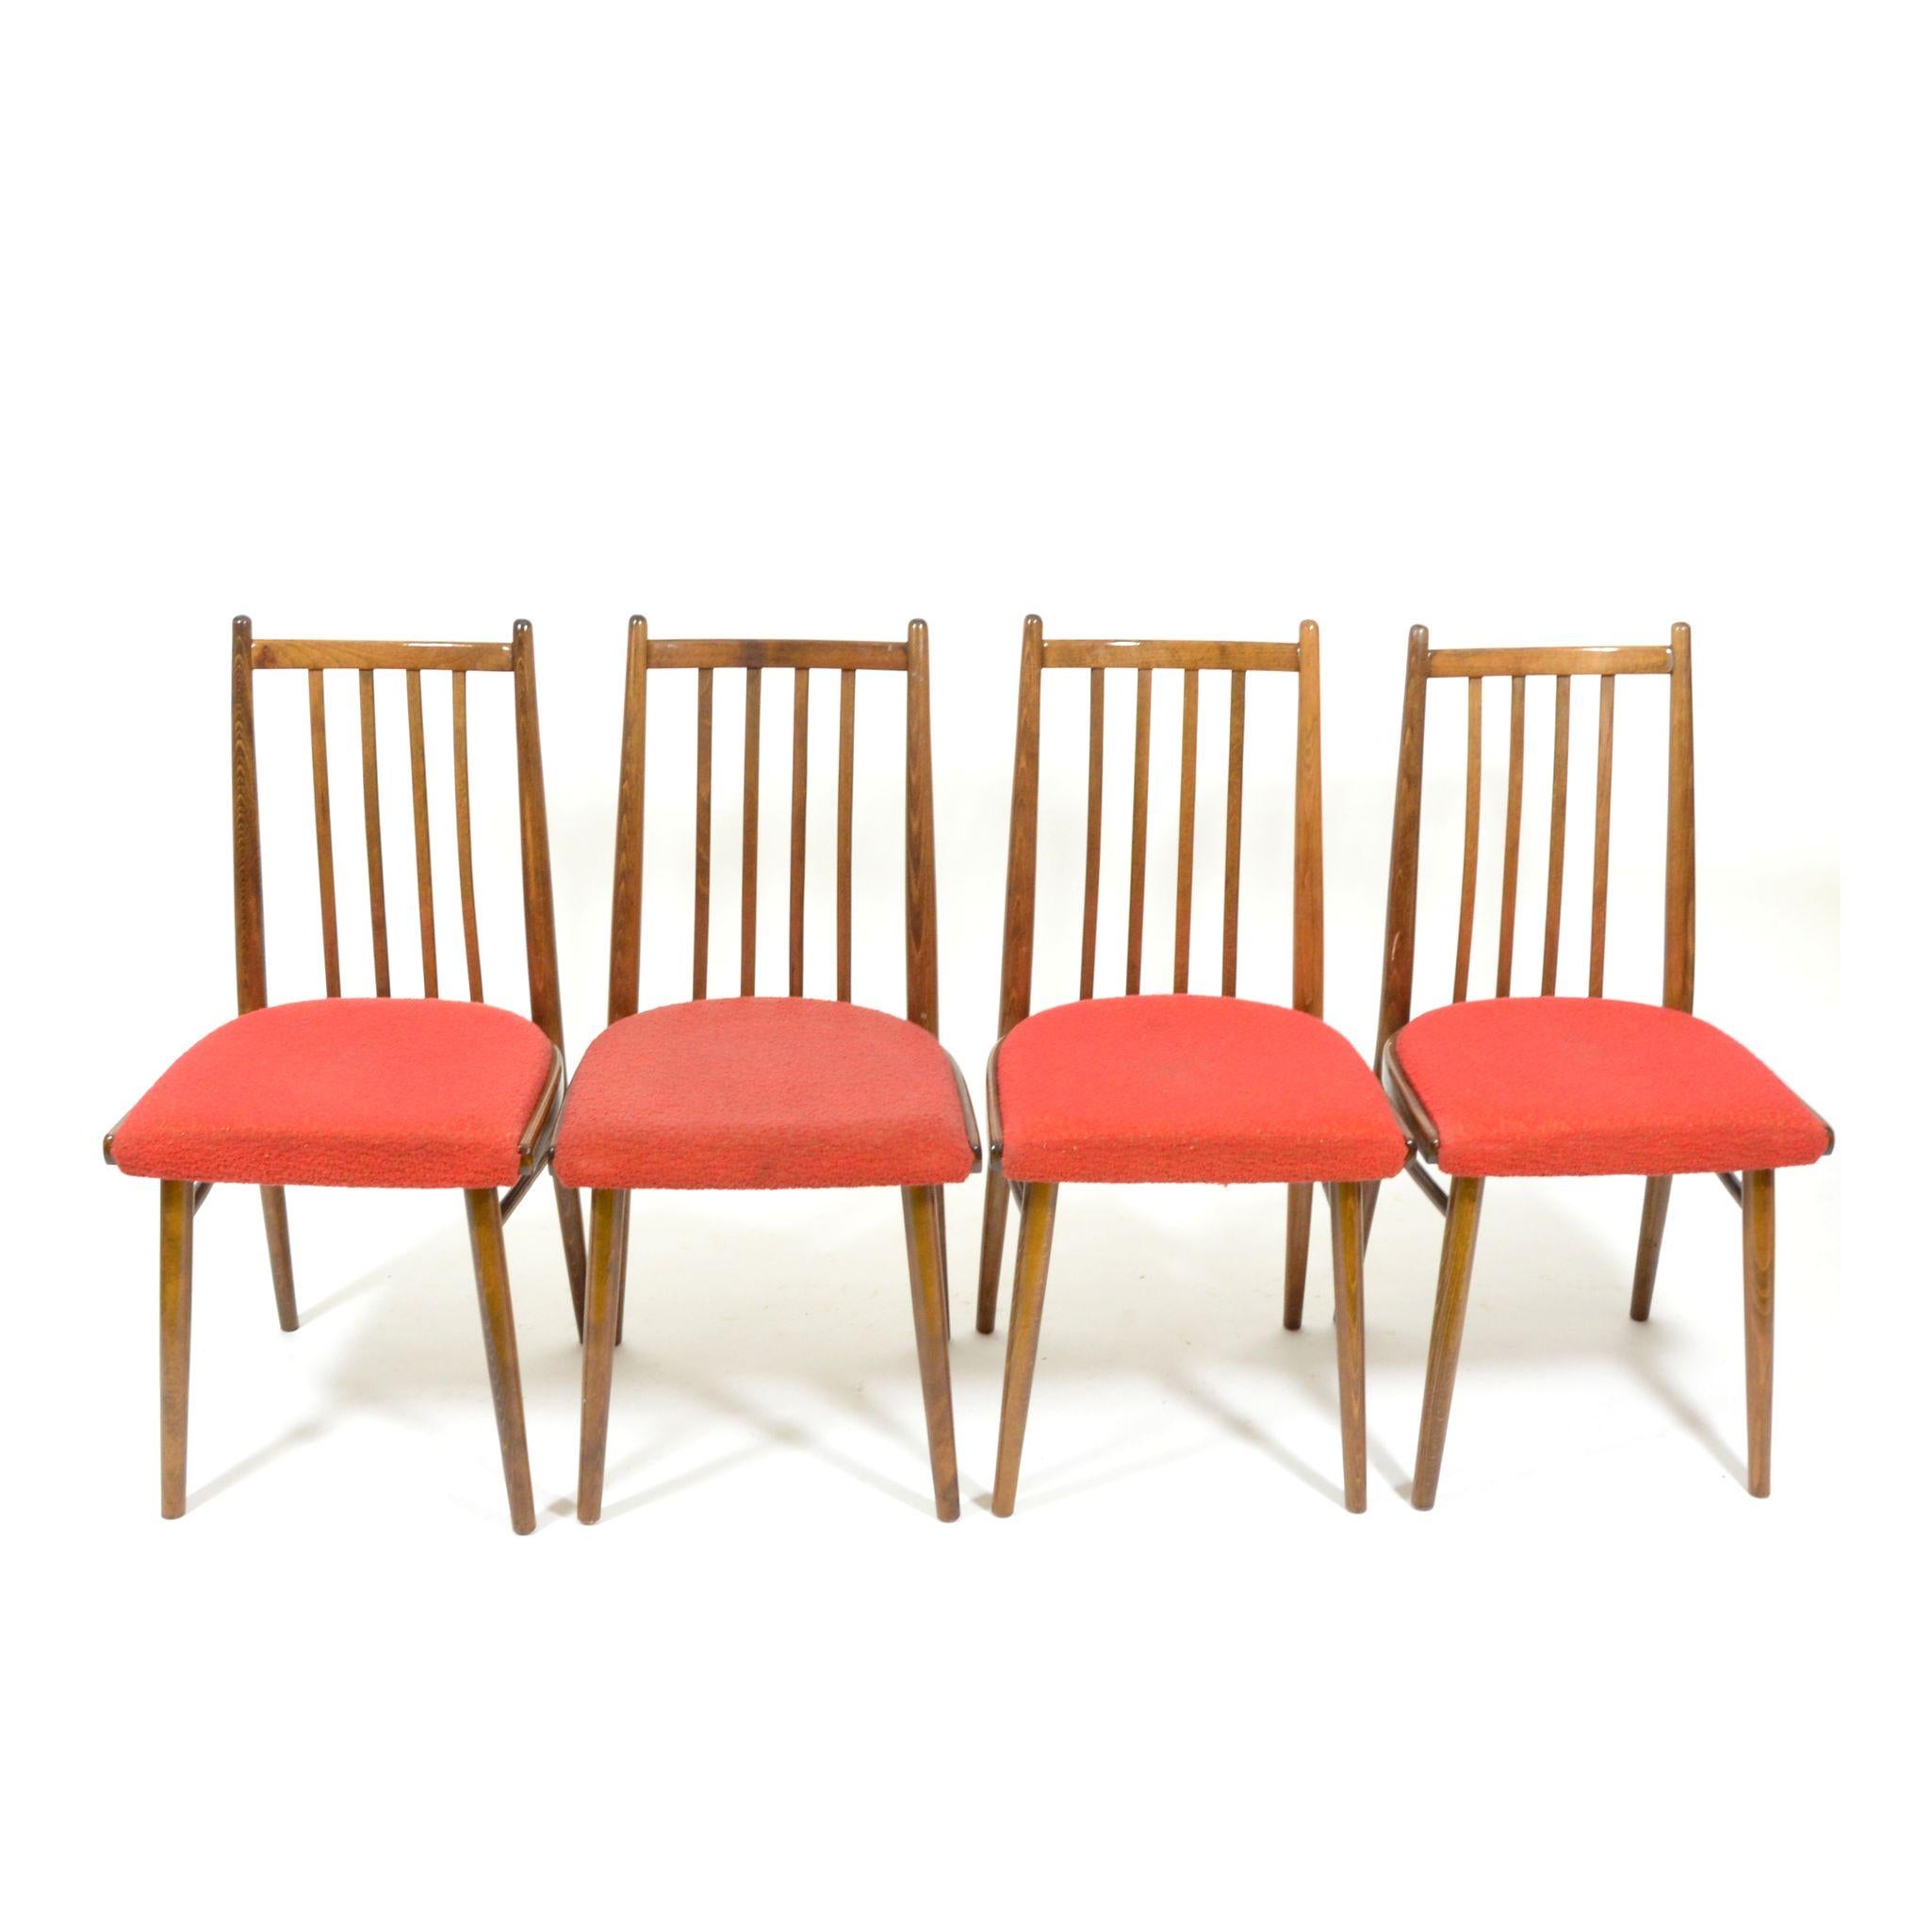 Set of Four Vintage Dining Chairs, Red Upholstered, Czechoslovakia, 1970s For Sale 5